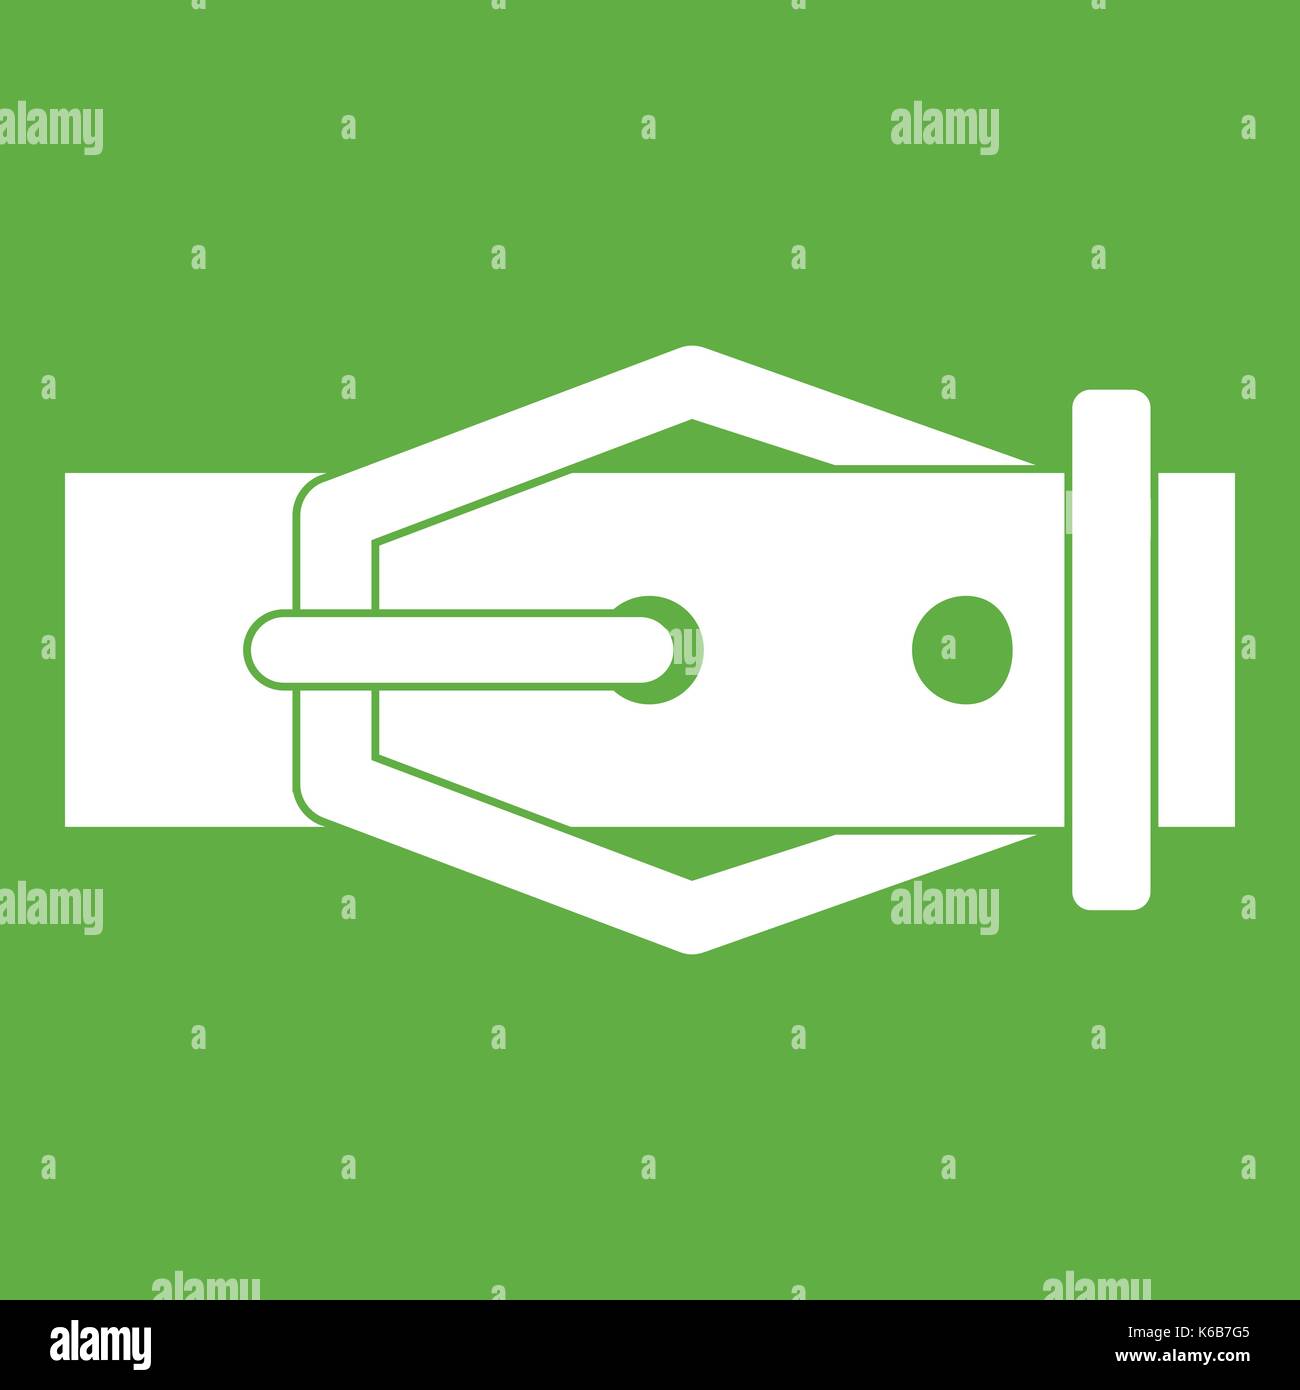 Leather belt icon green Stock Vector